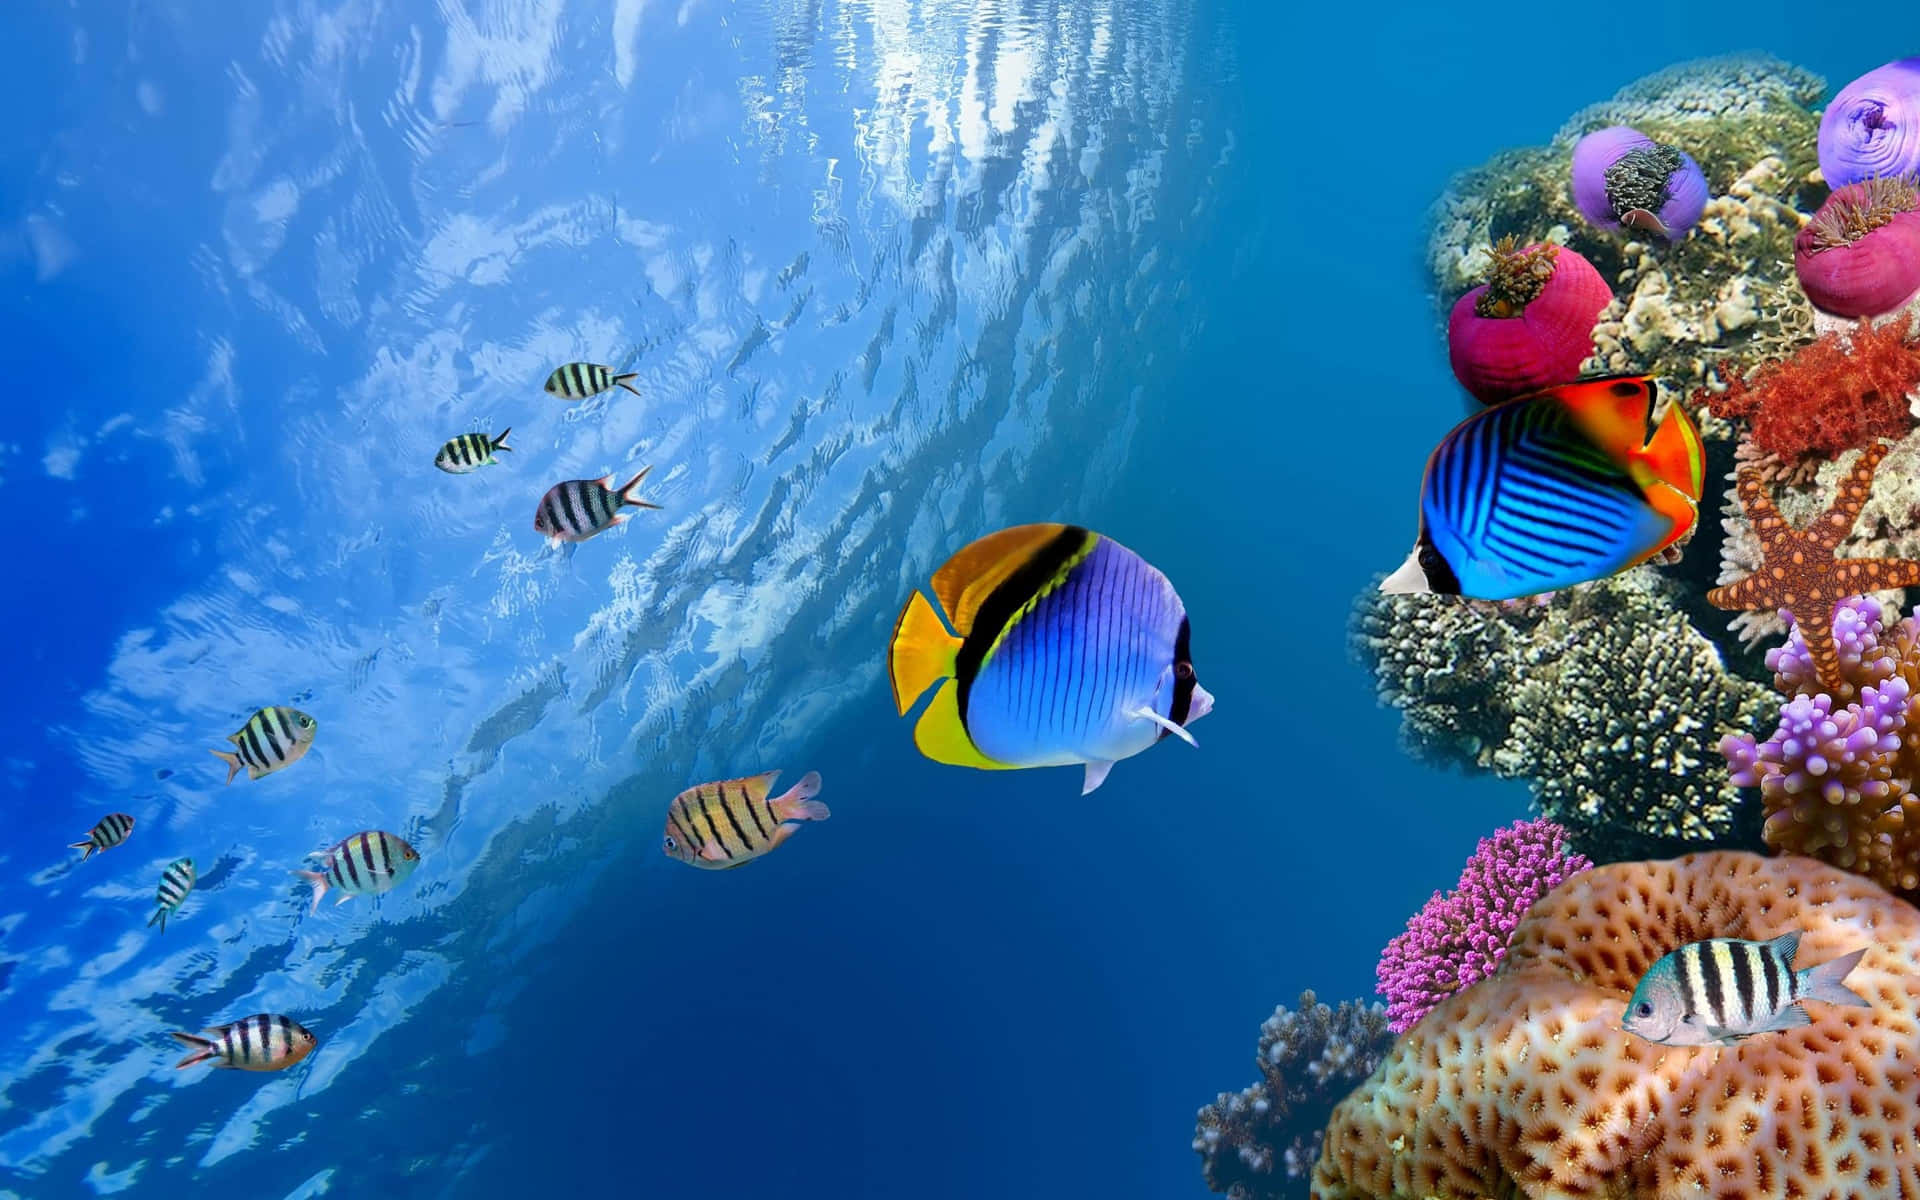 Move through the depths, experience the calmer side of life in the ocean. Wallpaper